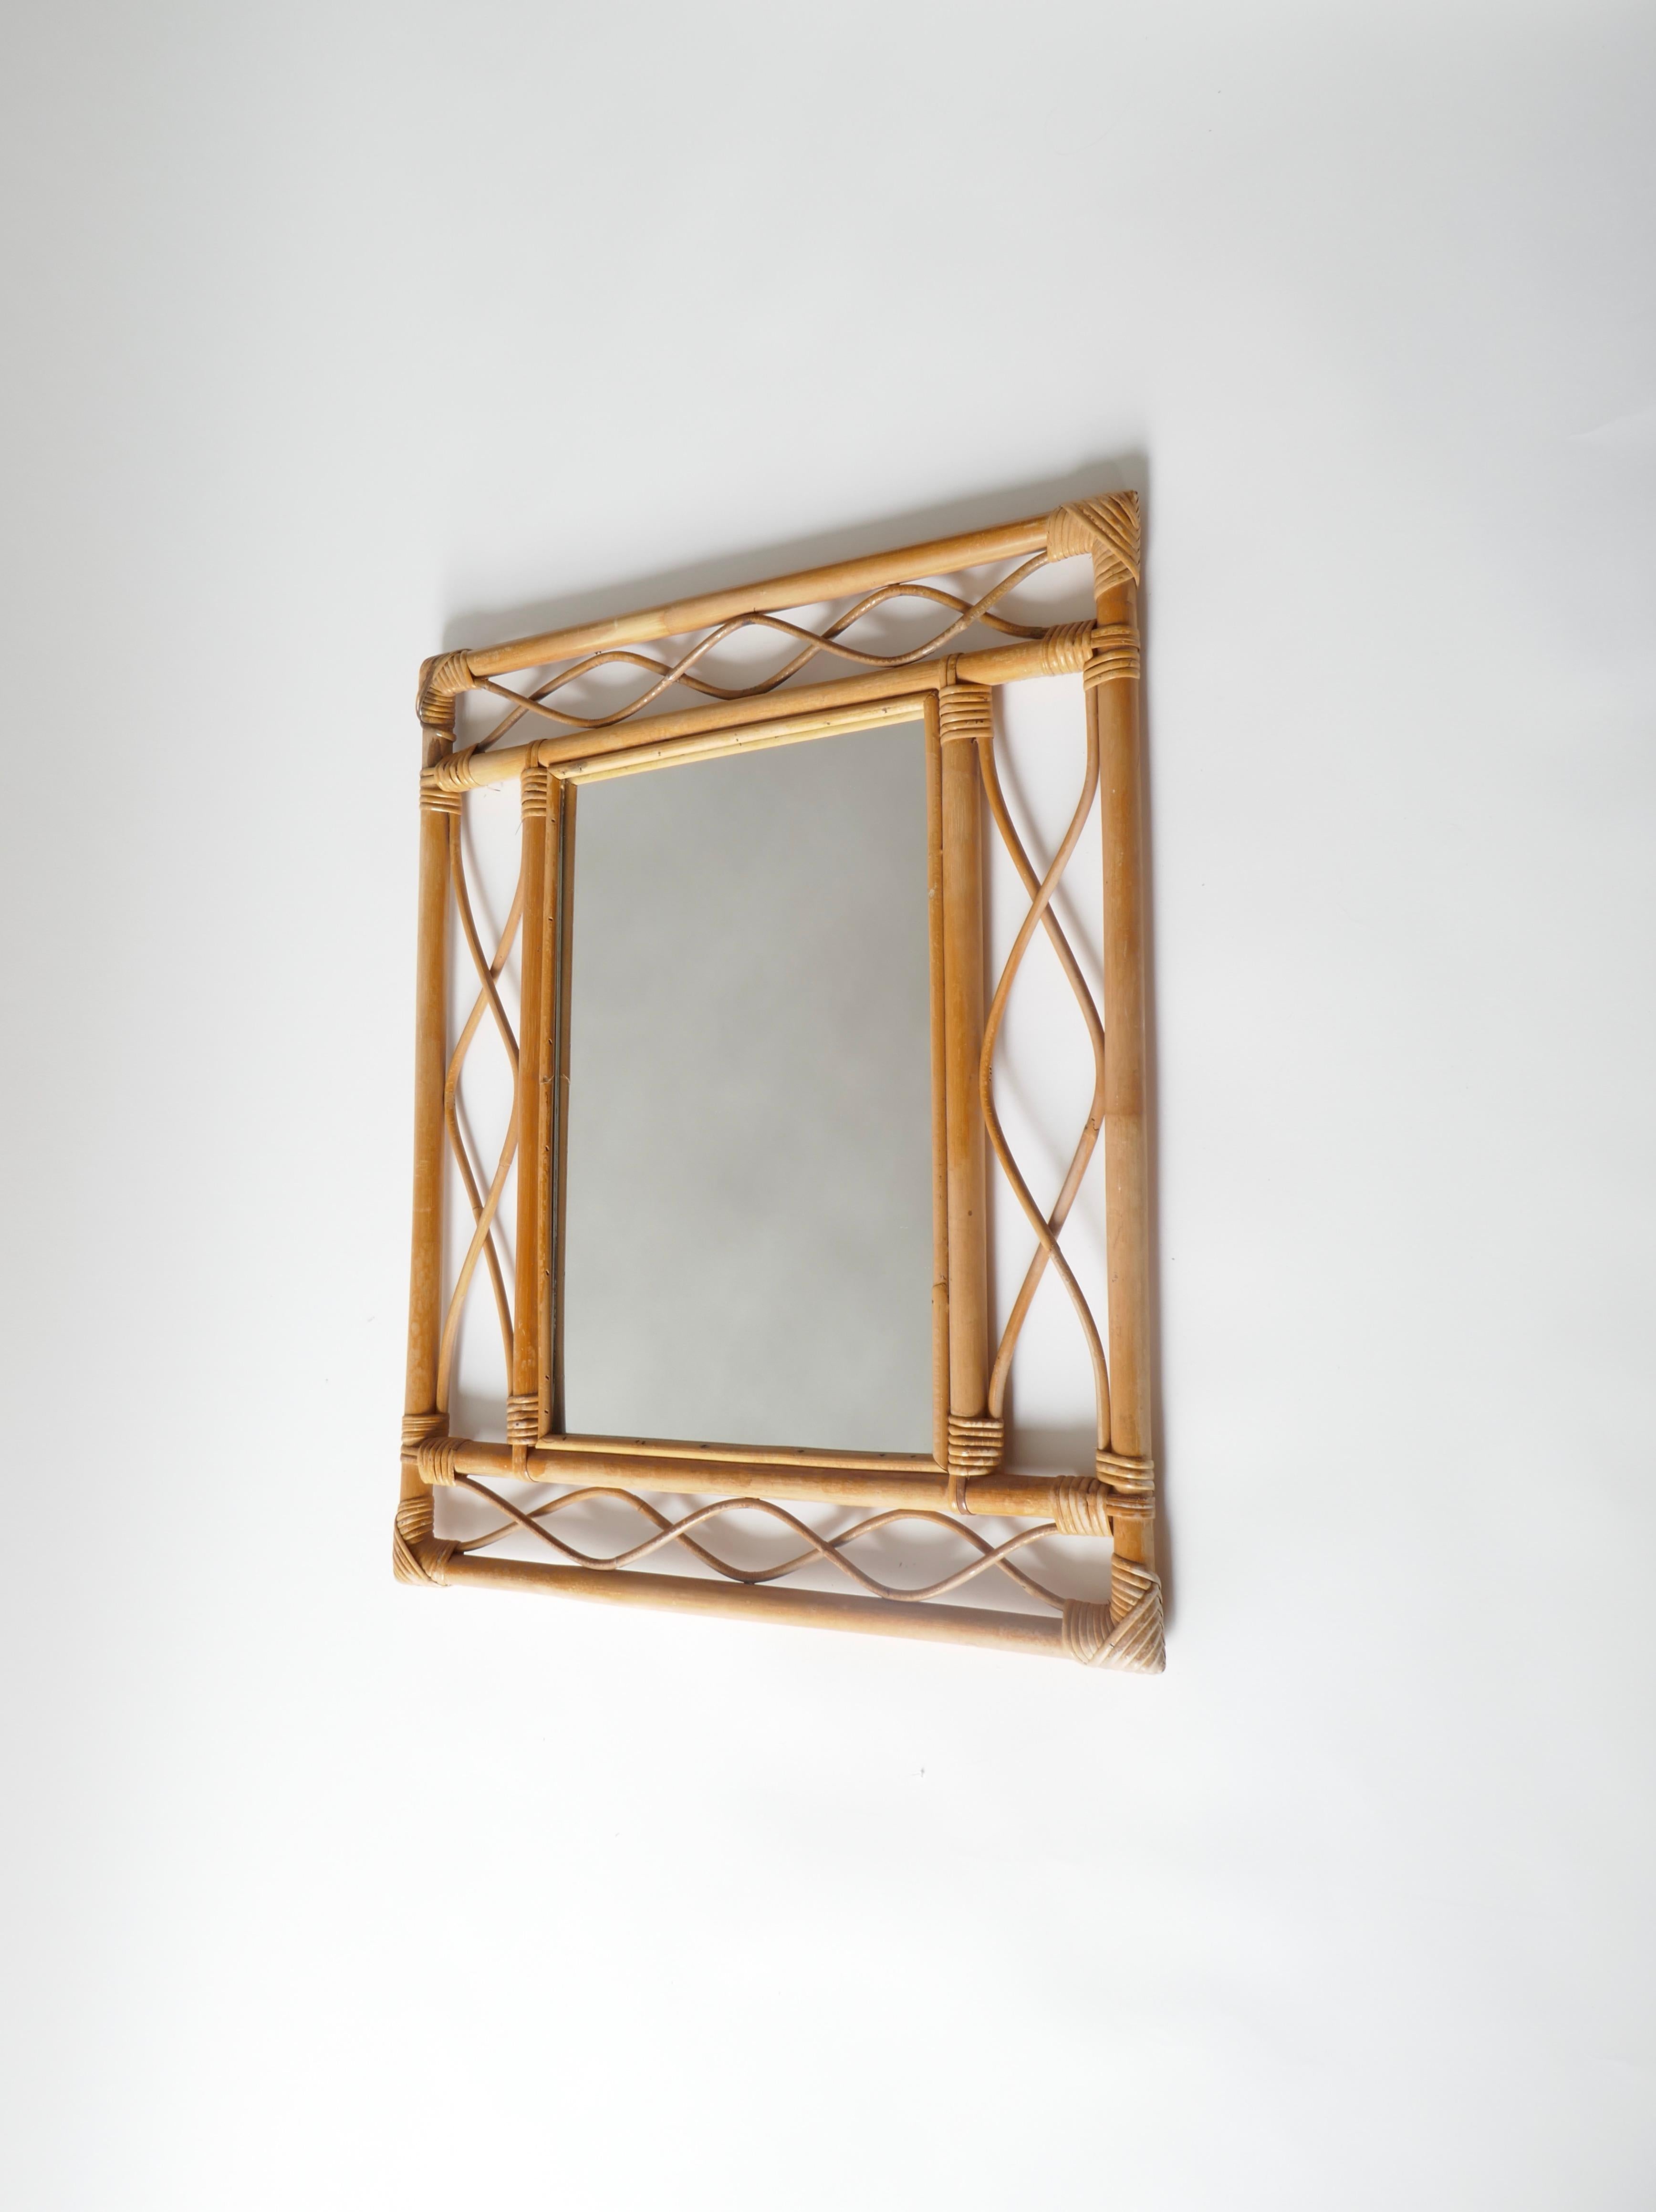 Mid-20th Century Rectangular Rattan and Bamboo Mirror, France, 1960s For Sale